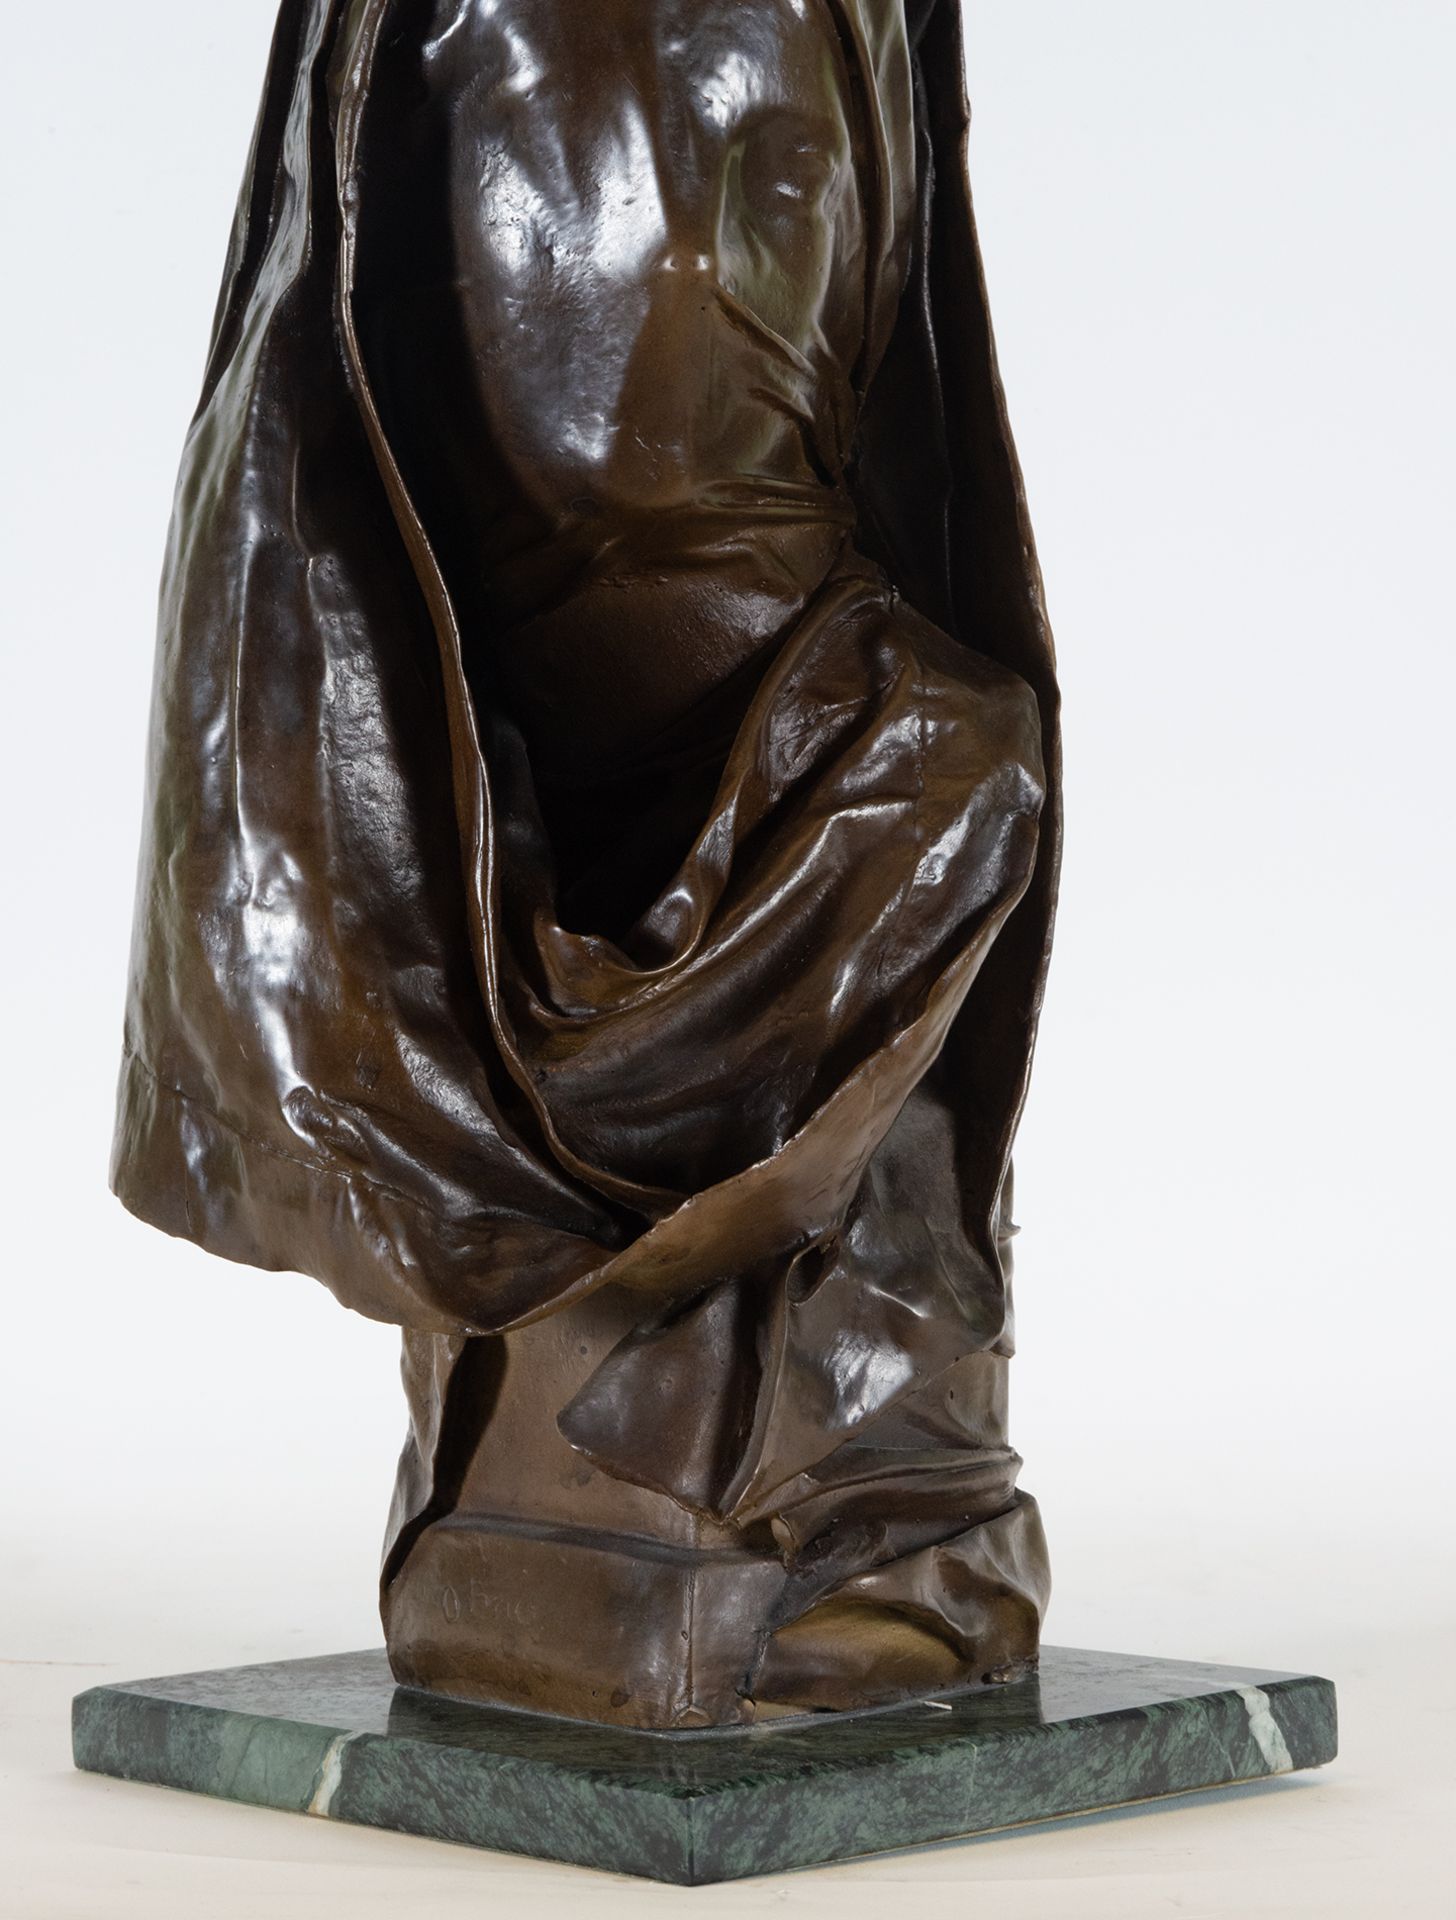 Bust of Lady with Veil, bronze sculpture, 19th century European school - Image 3 of 8